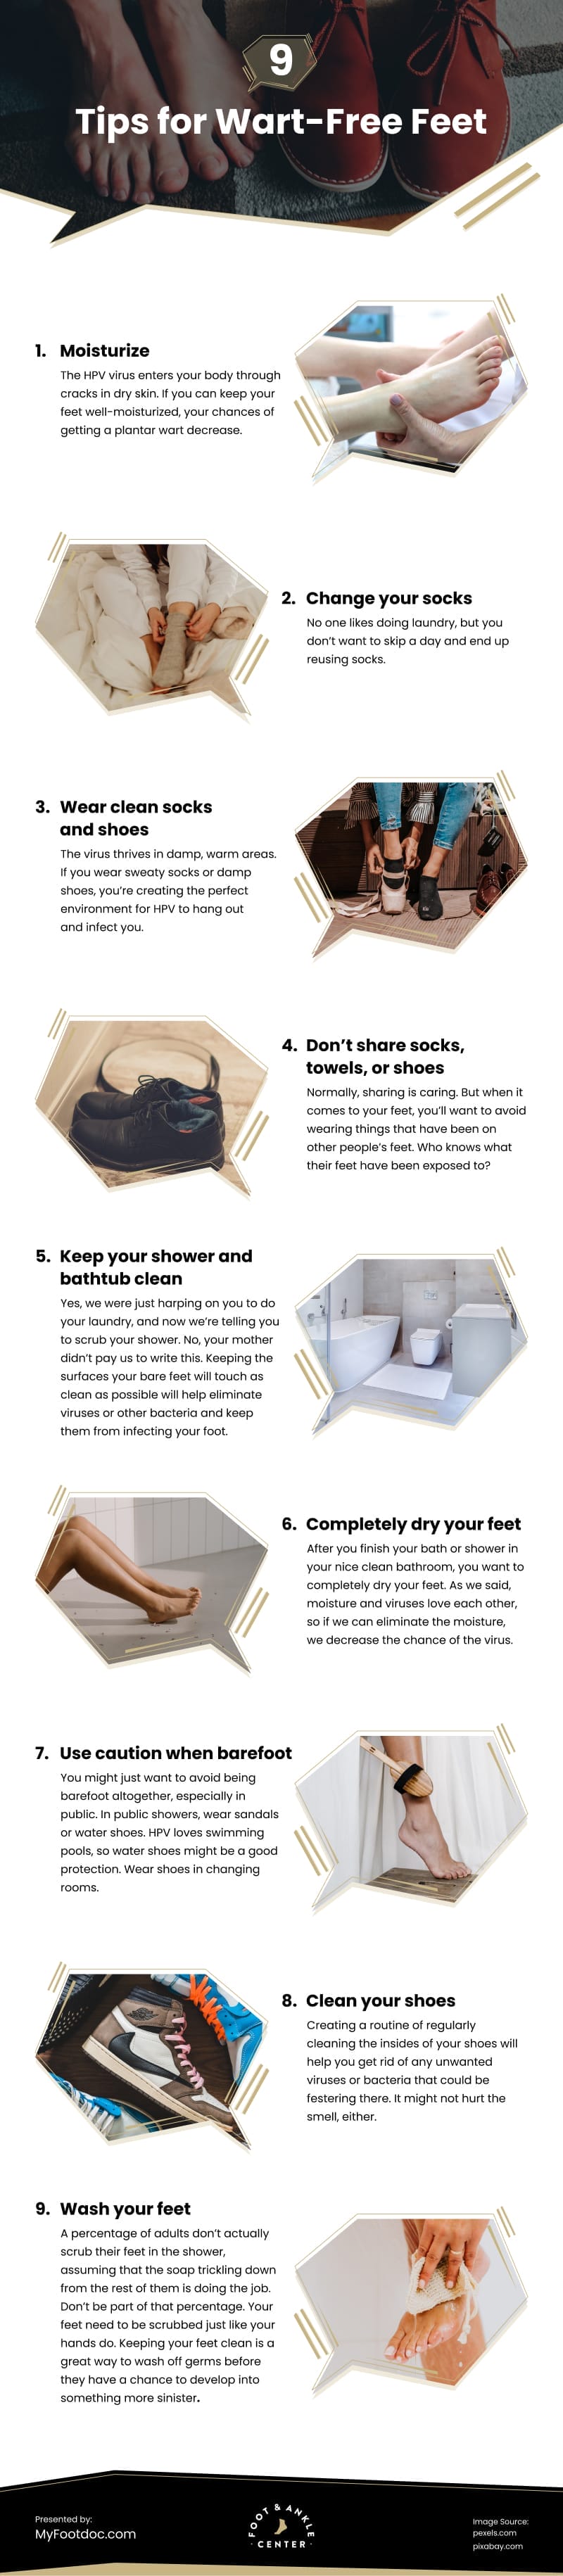 9 Tips to Keep Your Feet Wart-Free This Summer Infographic